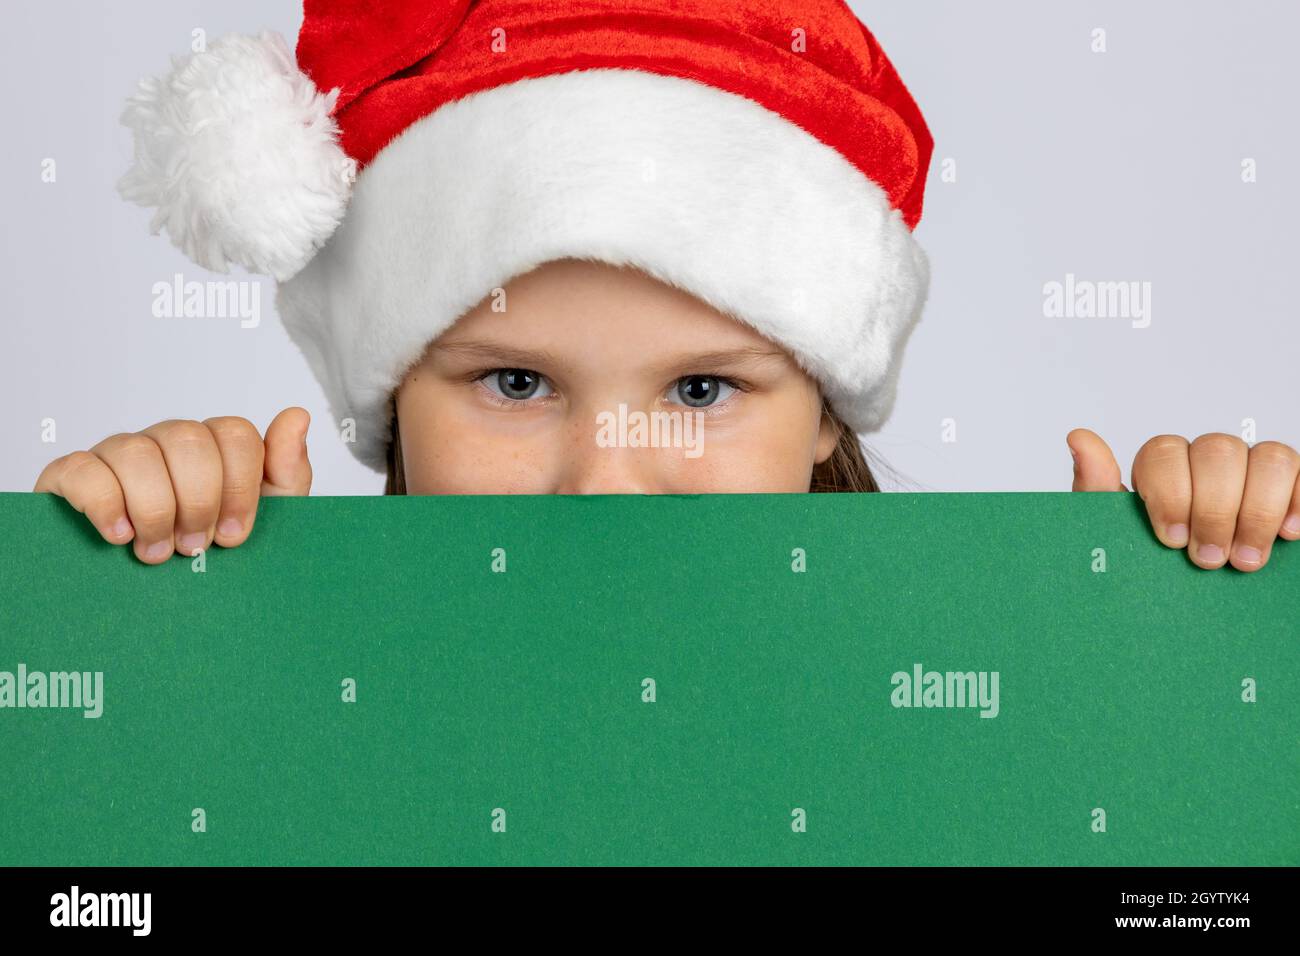 close-up portrait of a girl in a Christmas gnome hat hiding behind a black green poster in her hands , isolated on a white background Stock Photo